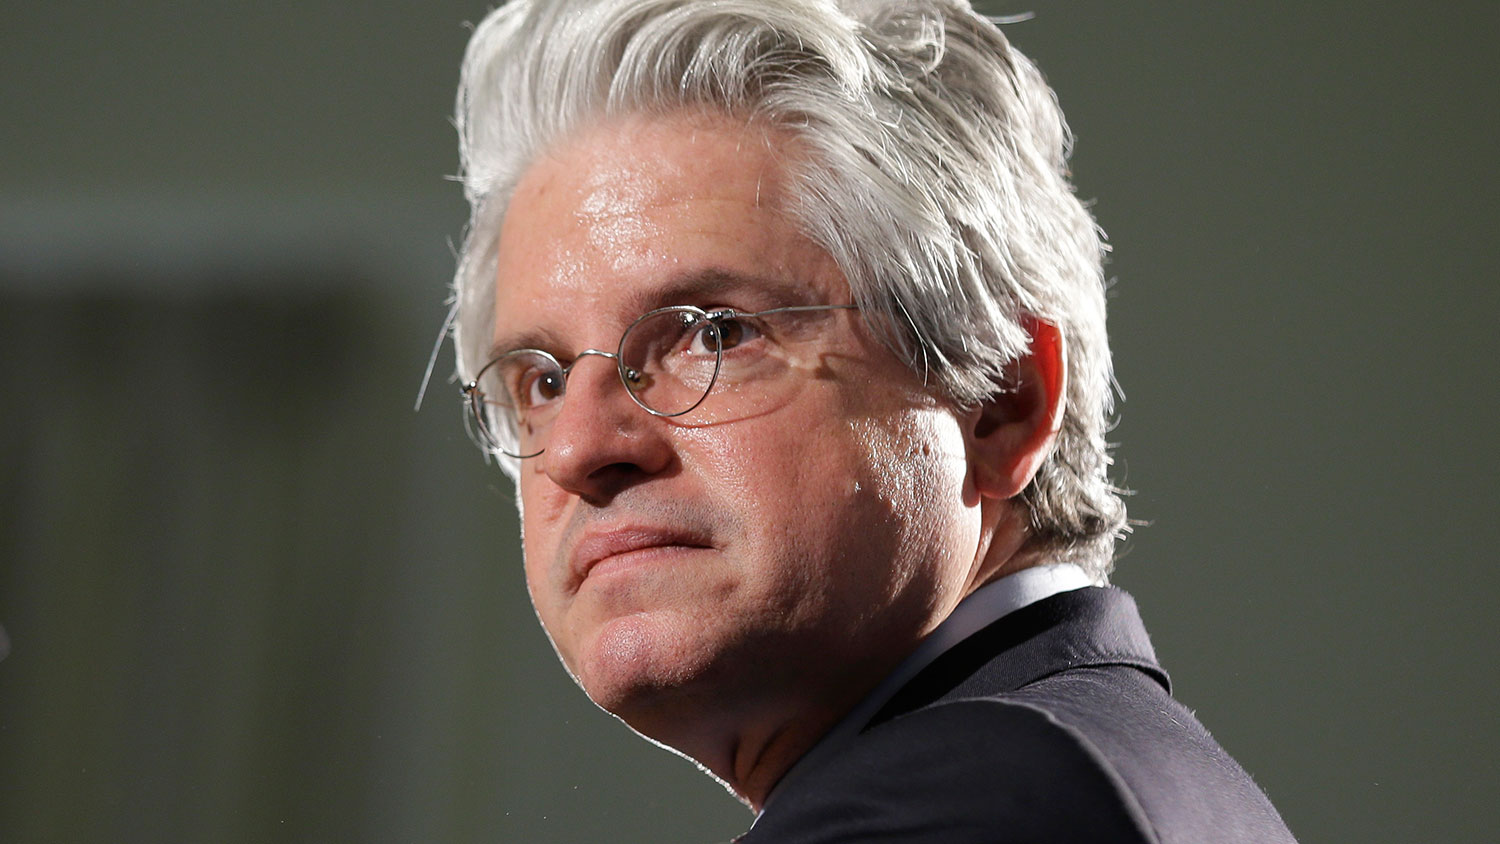 David Brock, founder of Correct the Record, speaks at the Clinton School of Public Service in Little Rock, Arkansas, on March 25, 2014.
